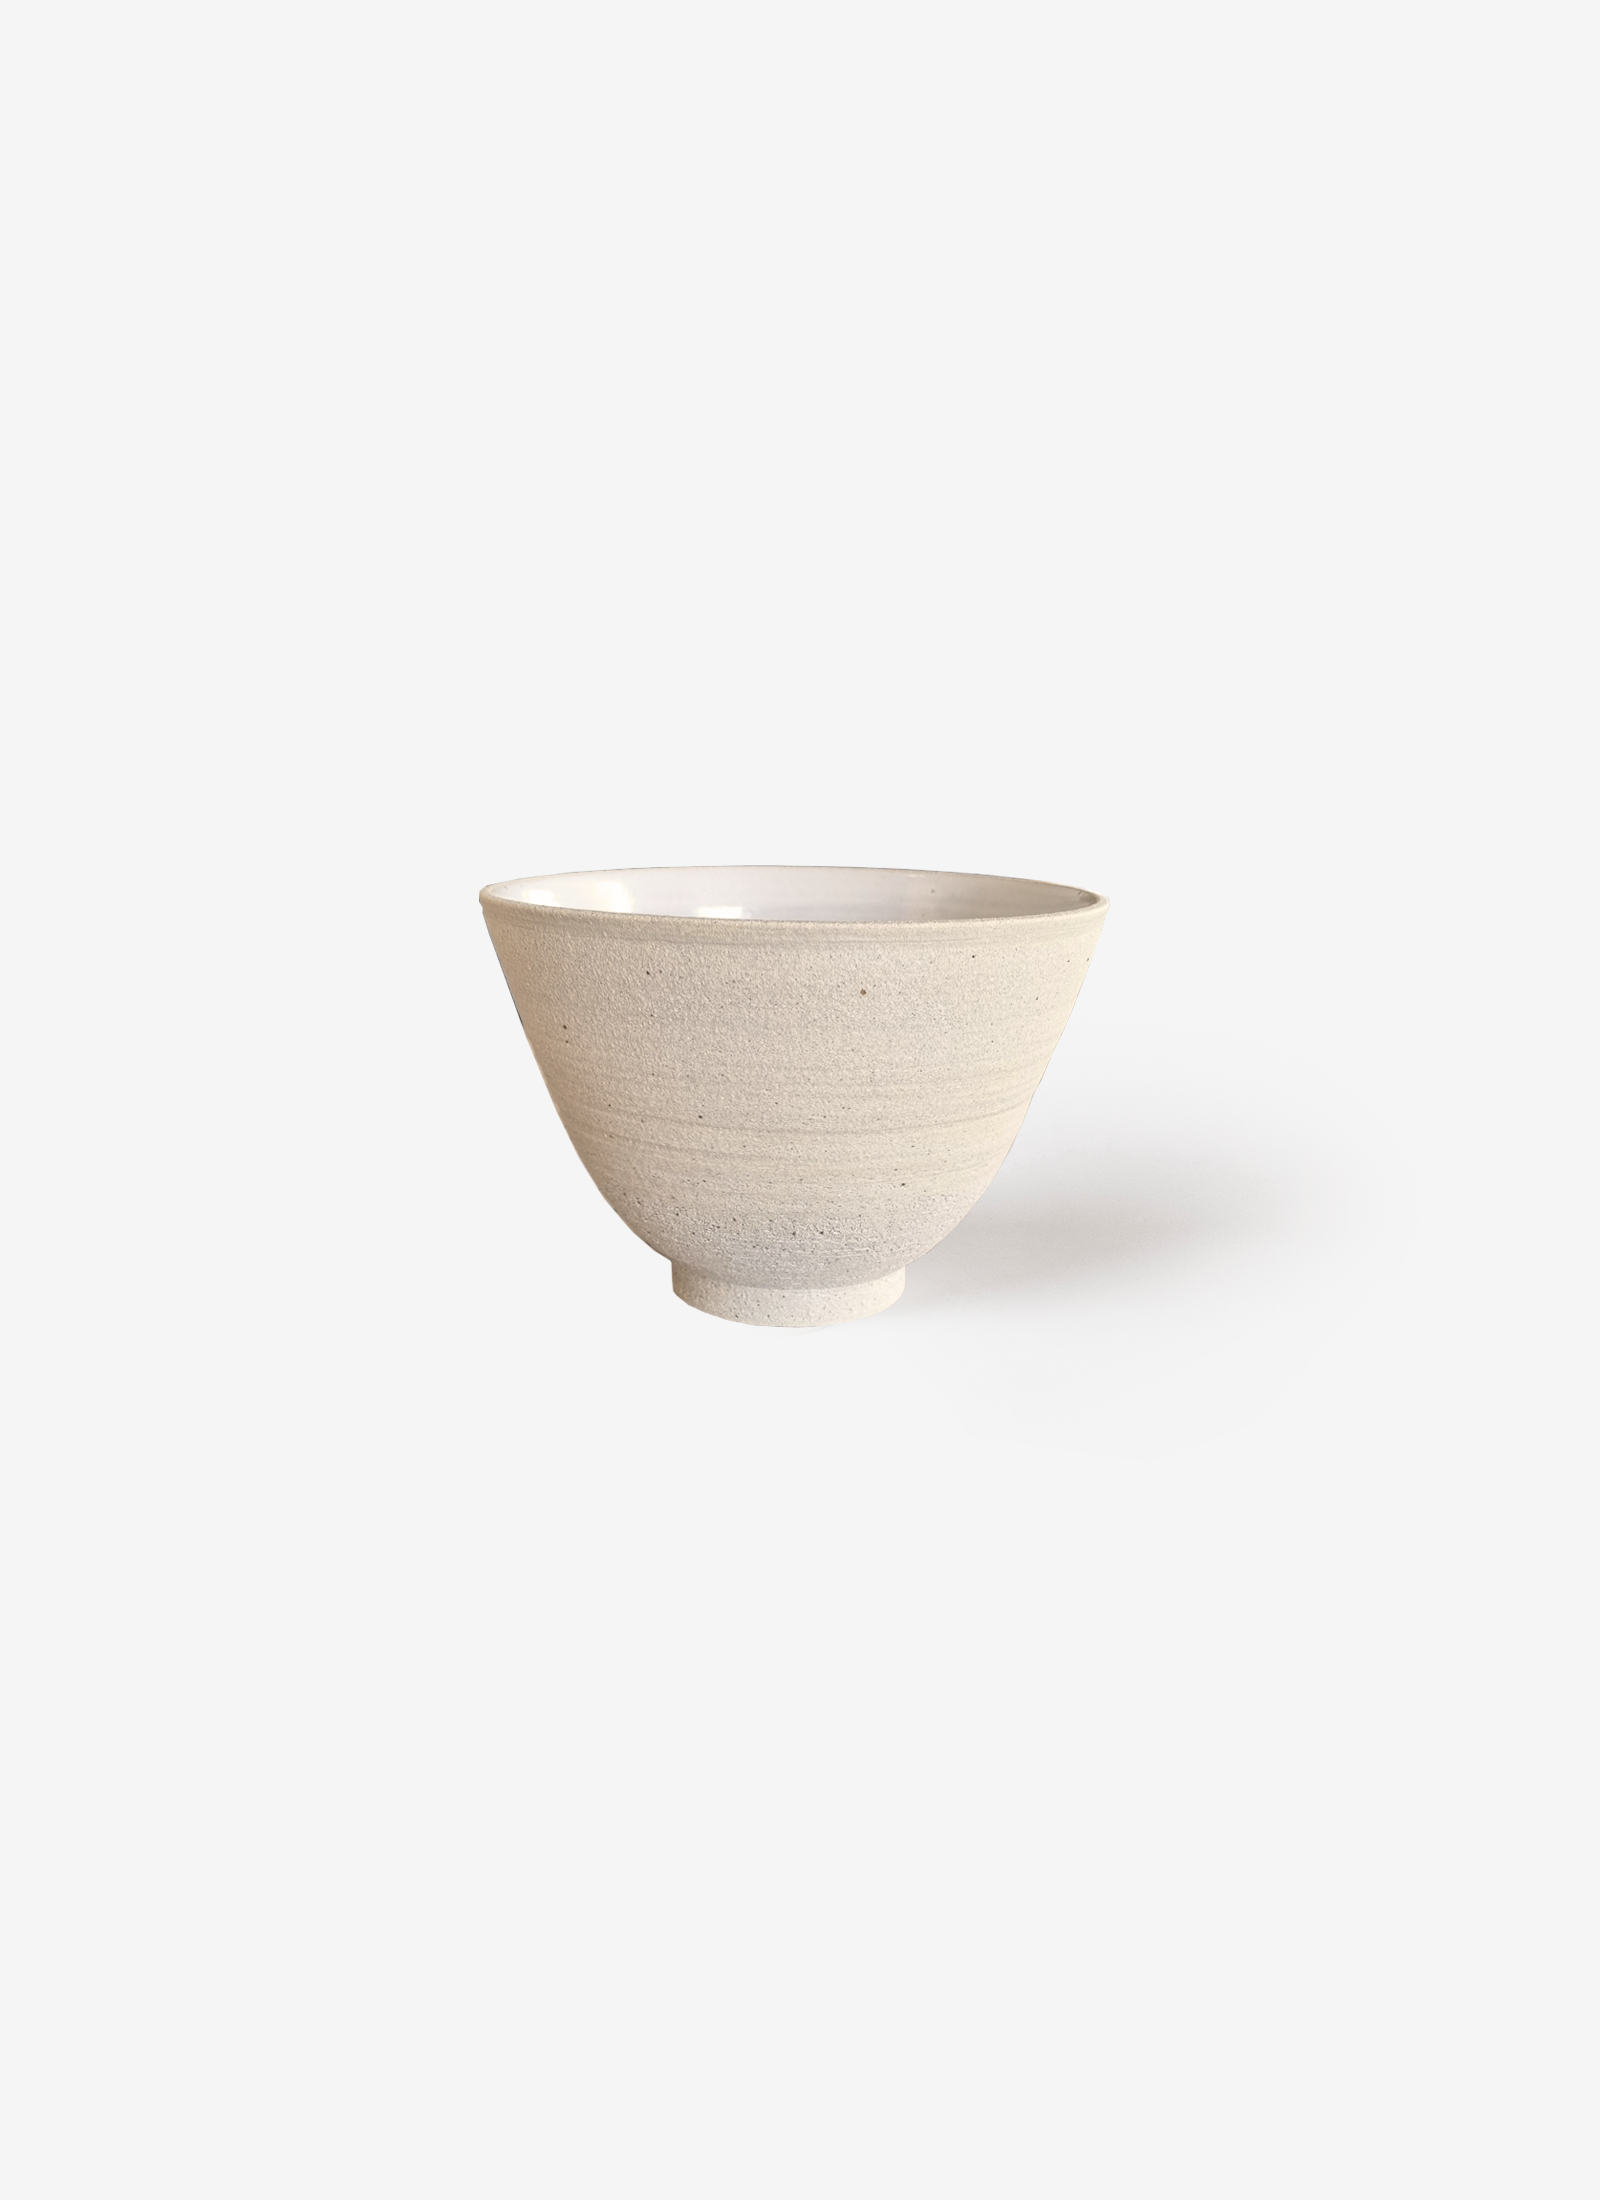 Rounded Bowls in Natural